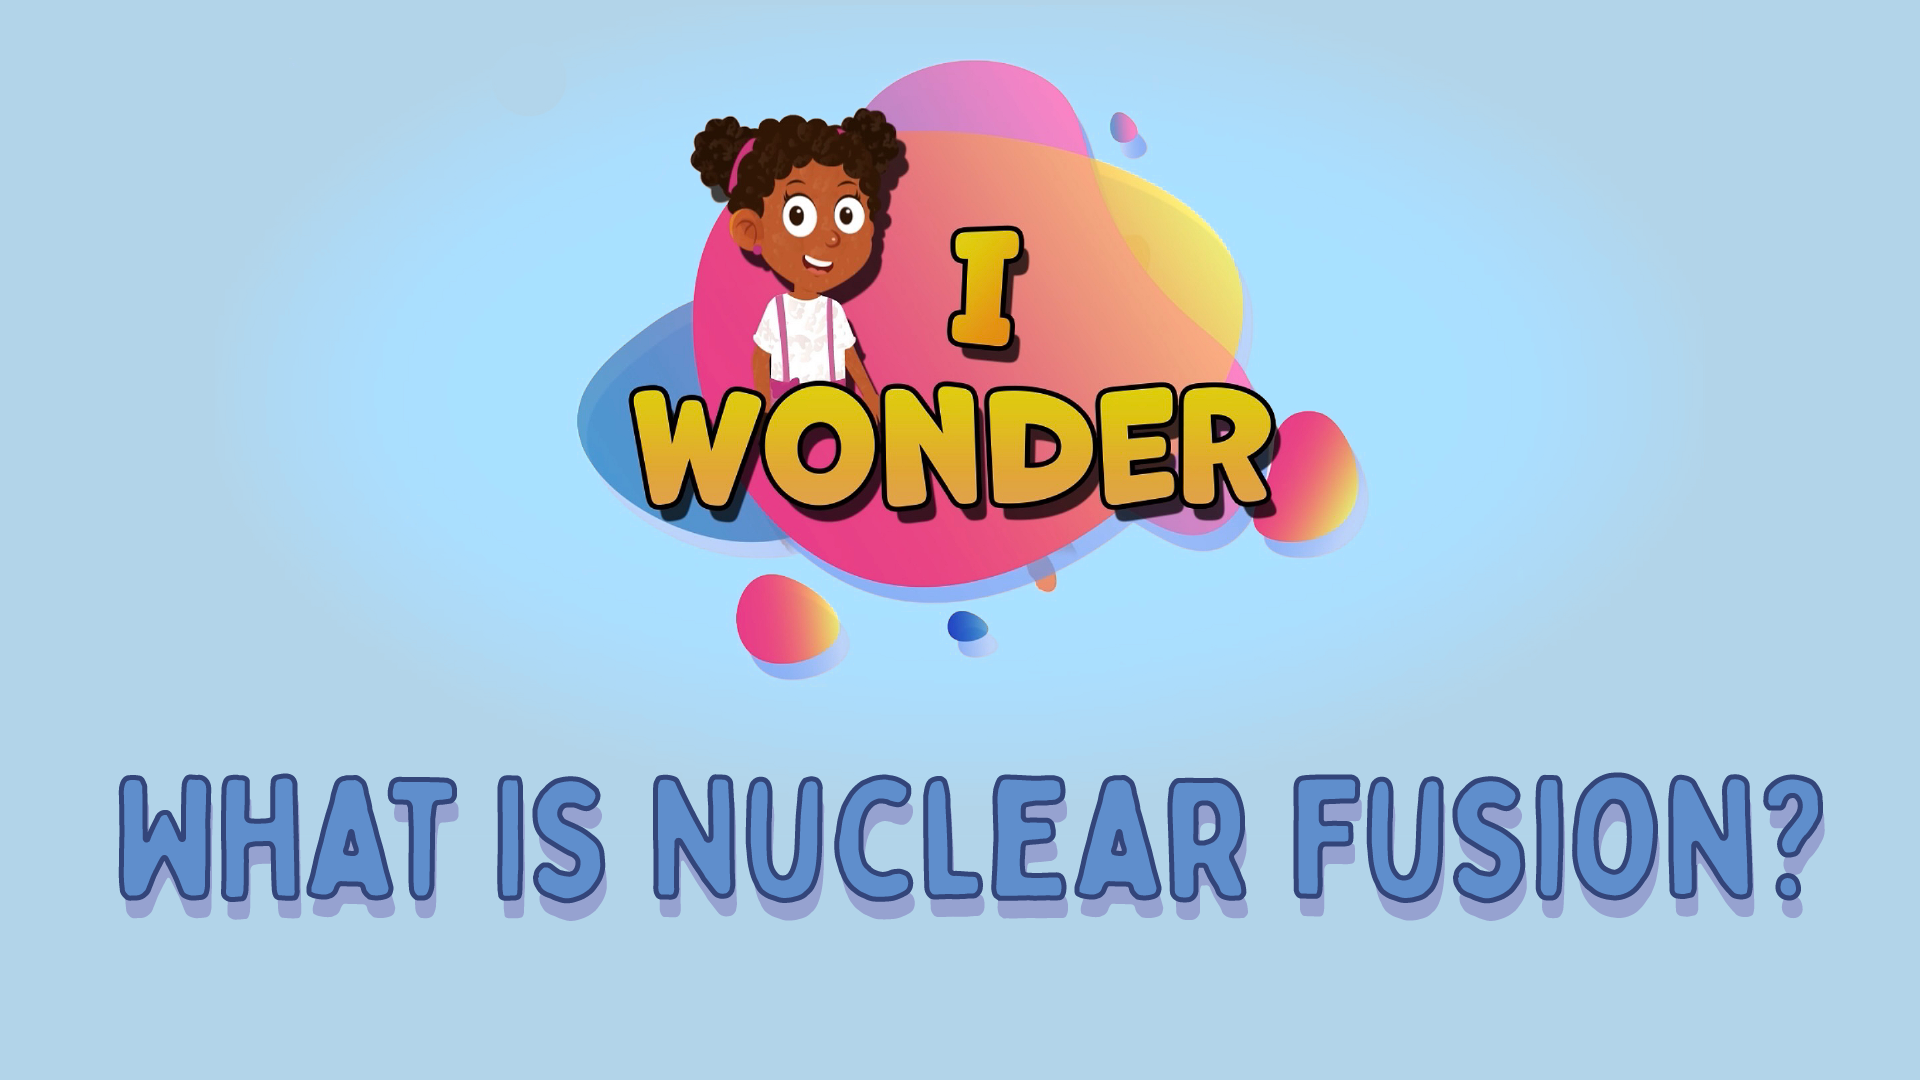 What Is Nuclear Fusion?